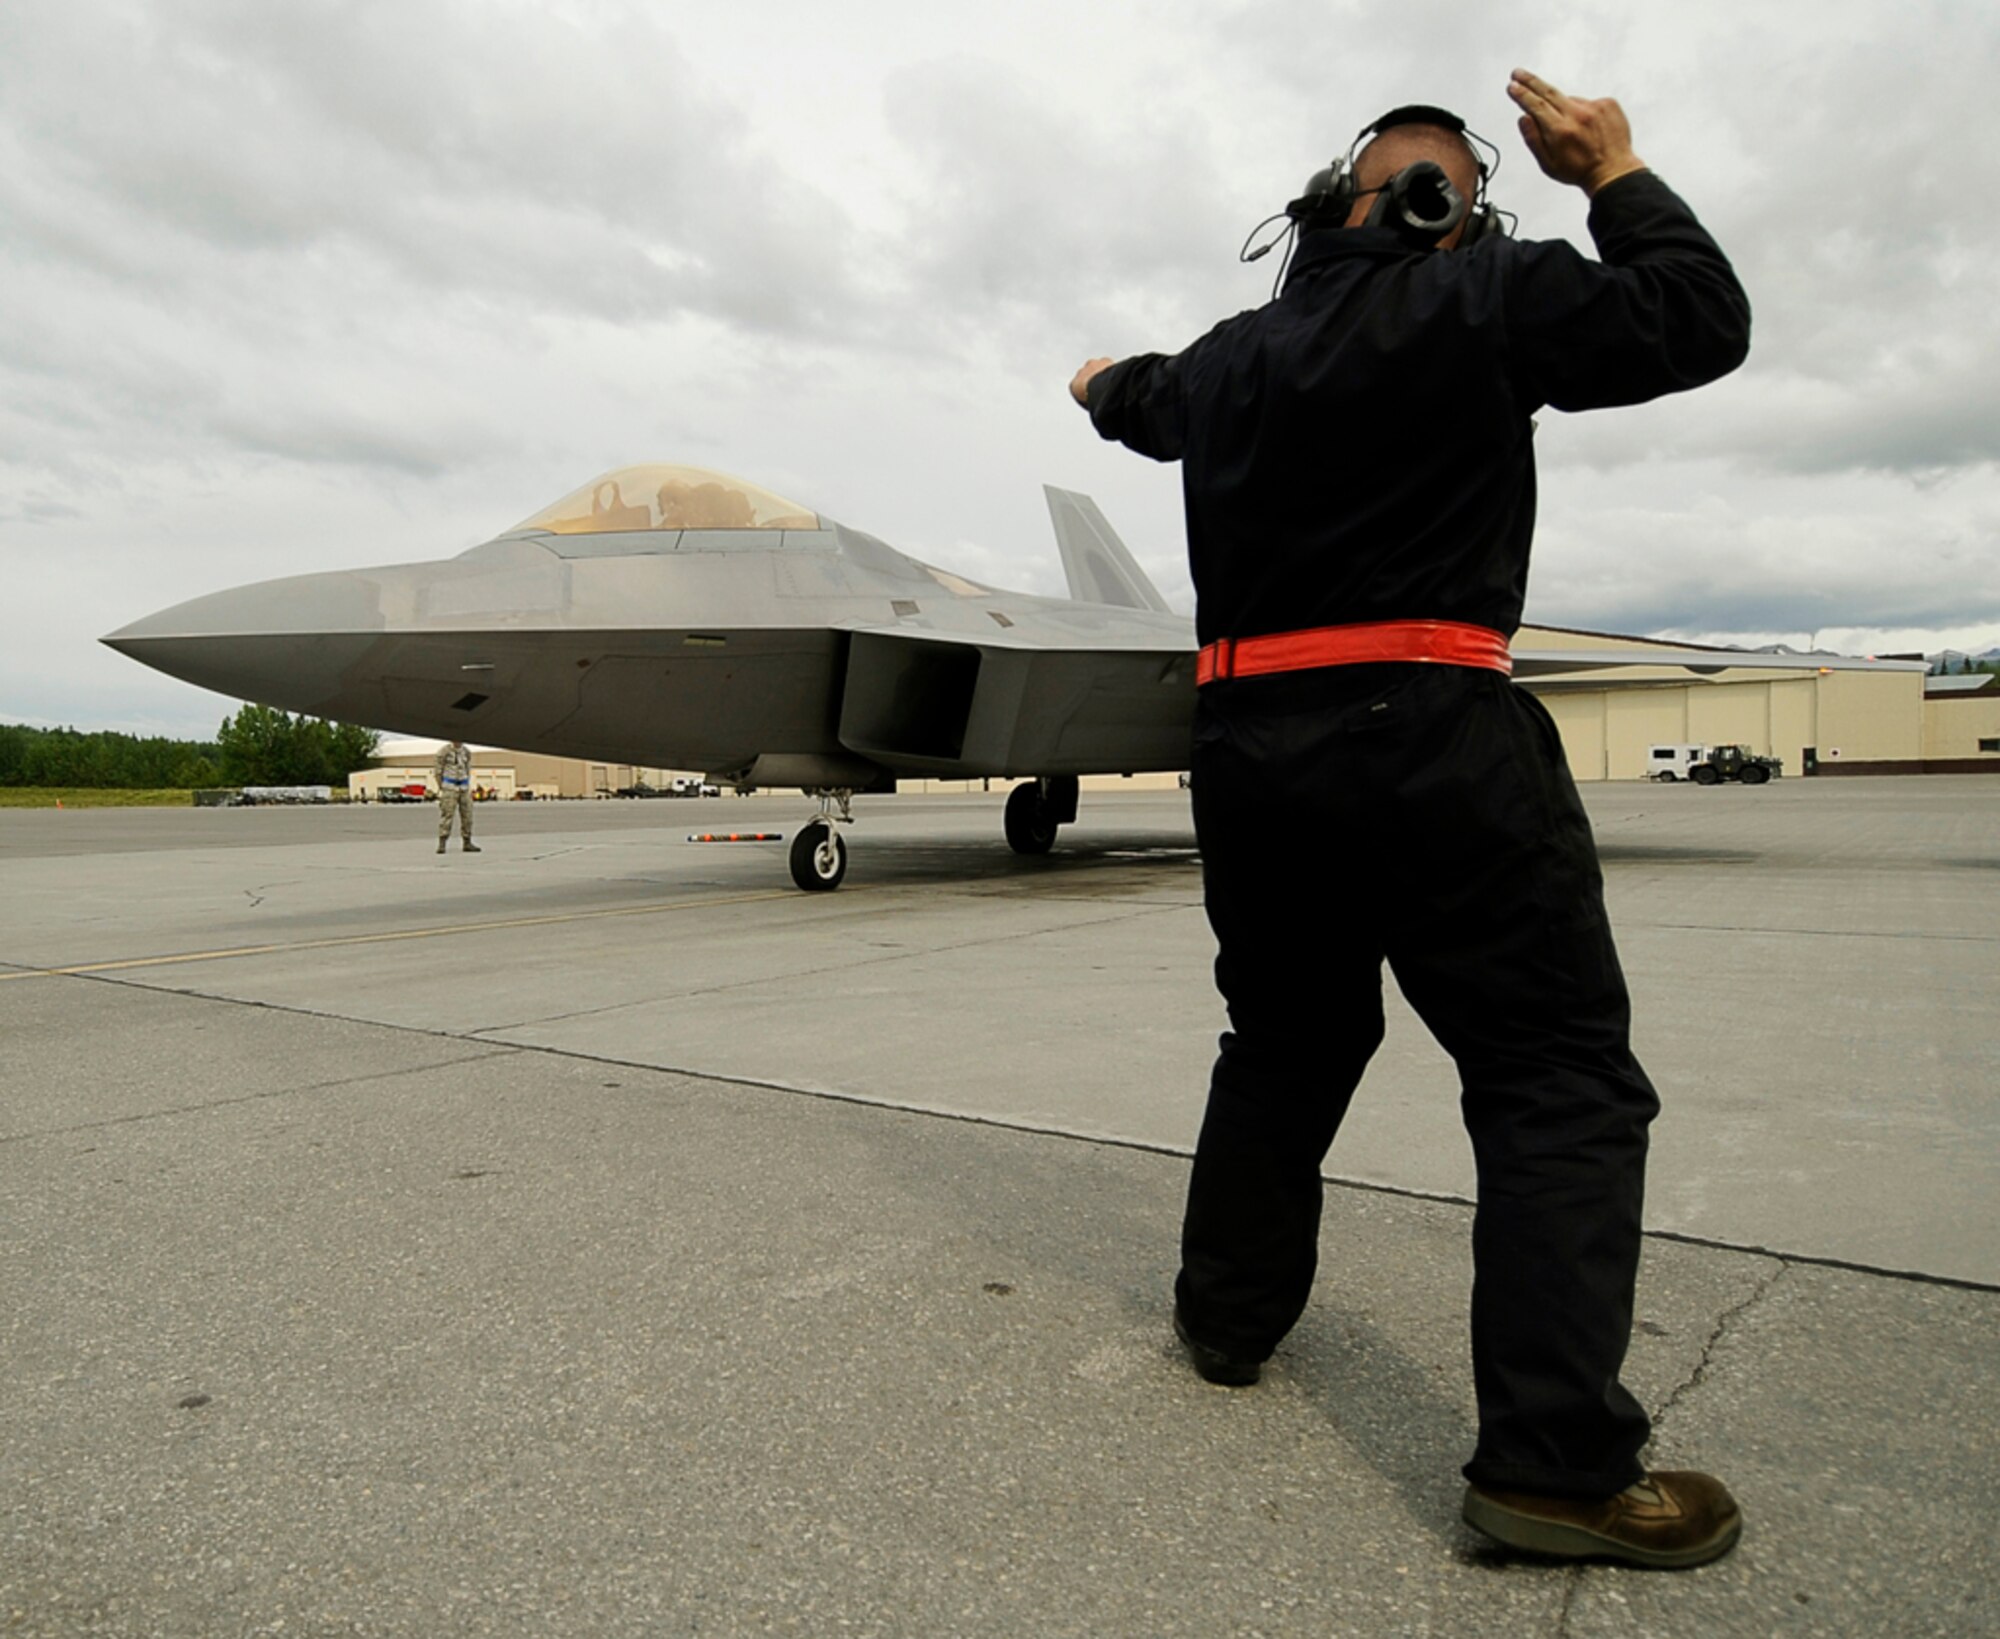 Airman 1st Class Holden Coladonato from the 90th Fighter Squadron, Elmendorf AFB, Alaska, prepares a F-22 Raptor for take off during exercise Northern Edge 2009, Elmendorf AFB, Alaska, June 17, 2009.  Northern Edge 2009 is Alaska's largest military training exercise.  It prepares joint forces to respond to crises throughout the Asia-Pacific region.  (Released/U.S. Air Force photo by TSgt Dennis J. Henry Jr.)